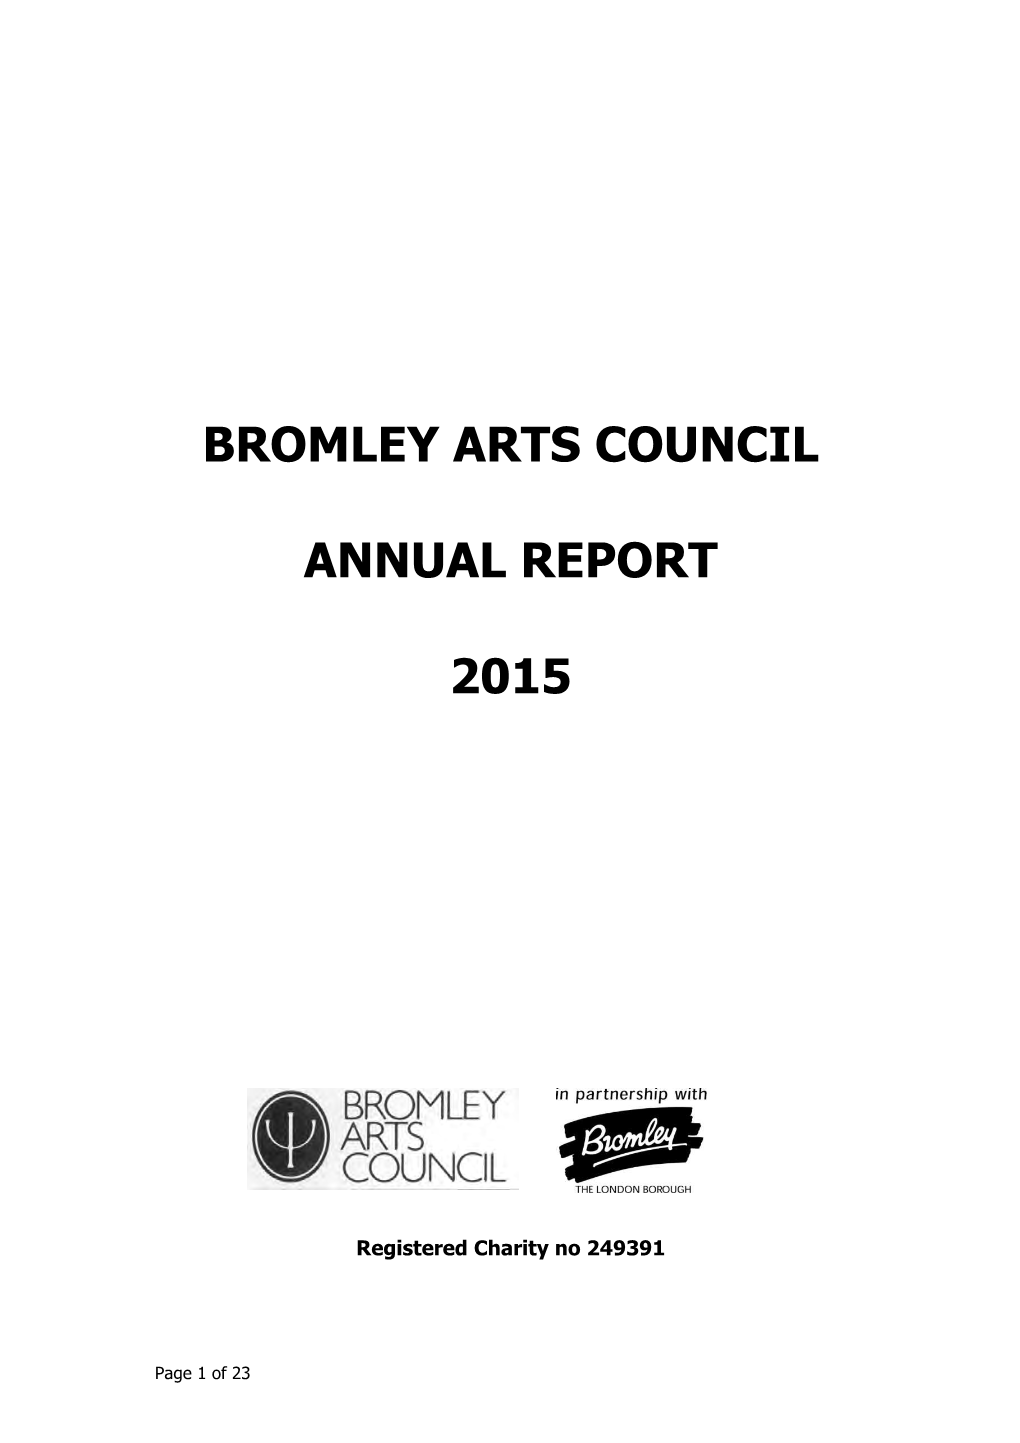 Bromley Arts Council Annual Report 2015